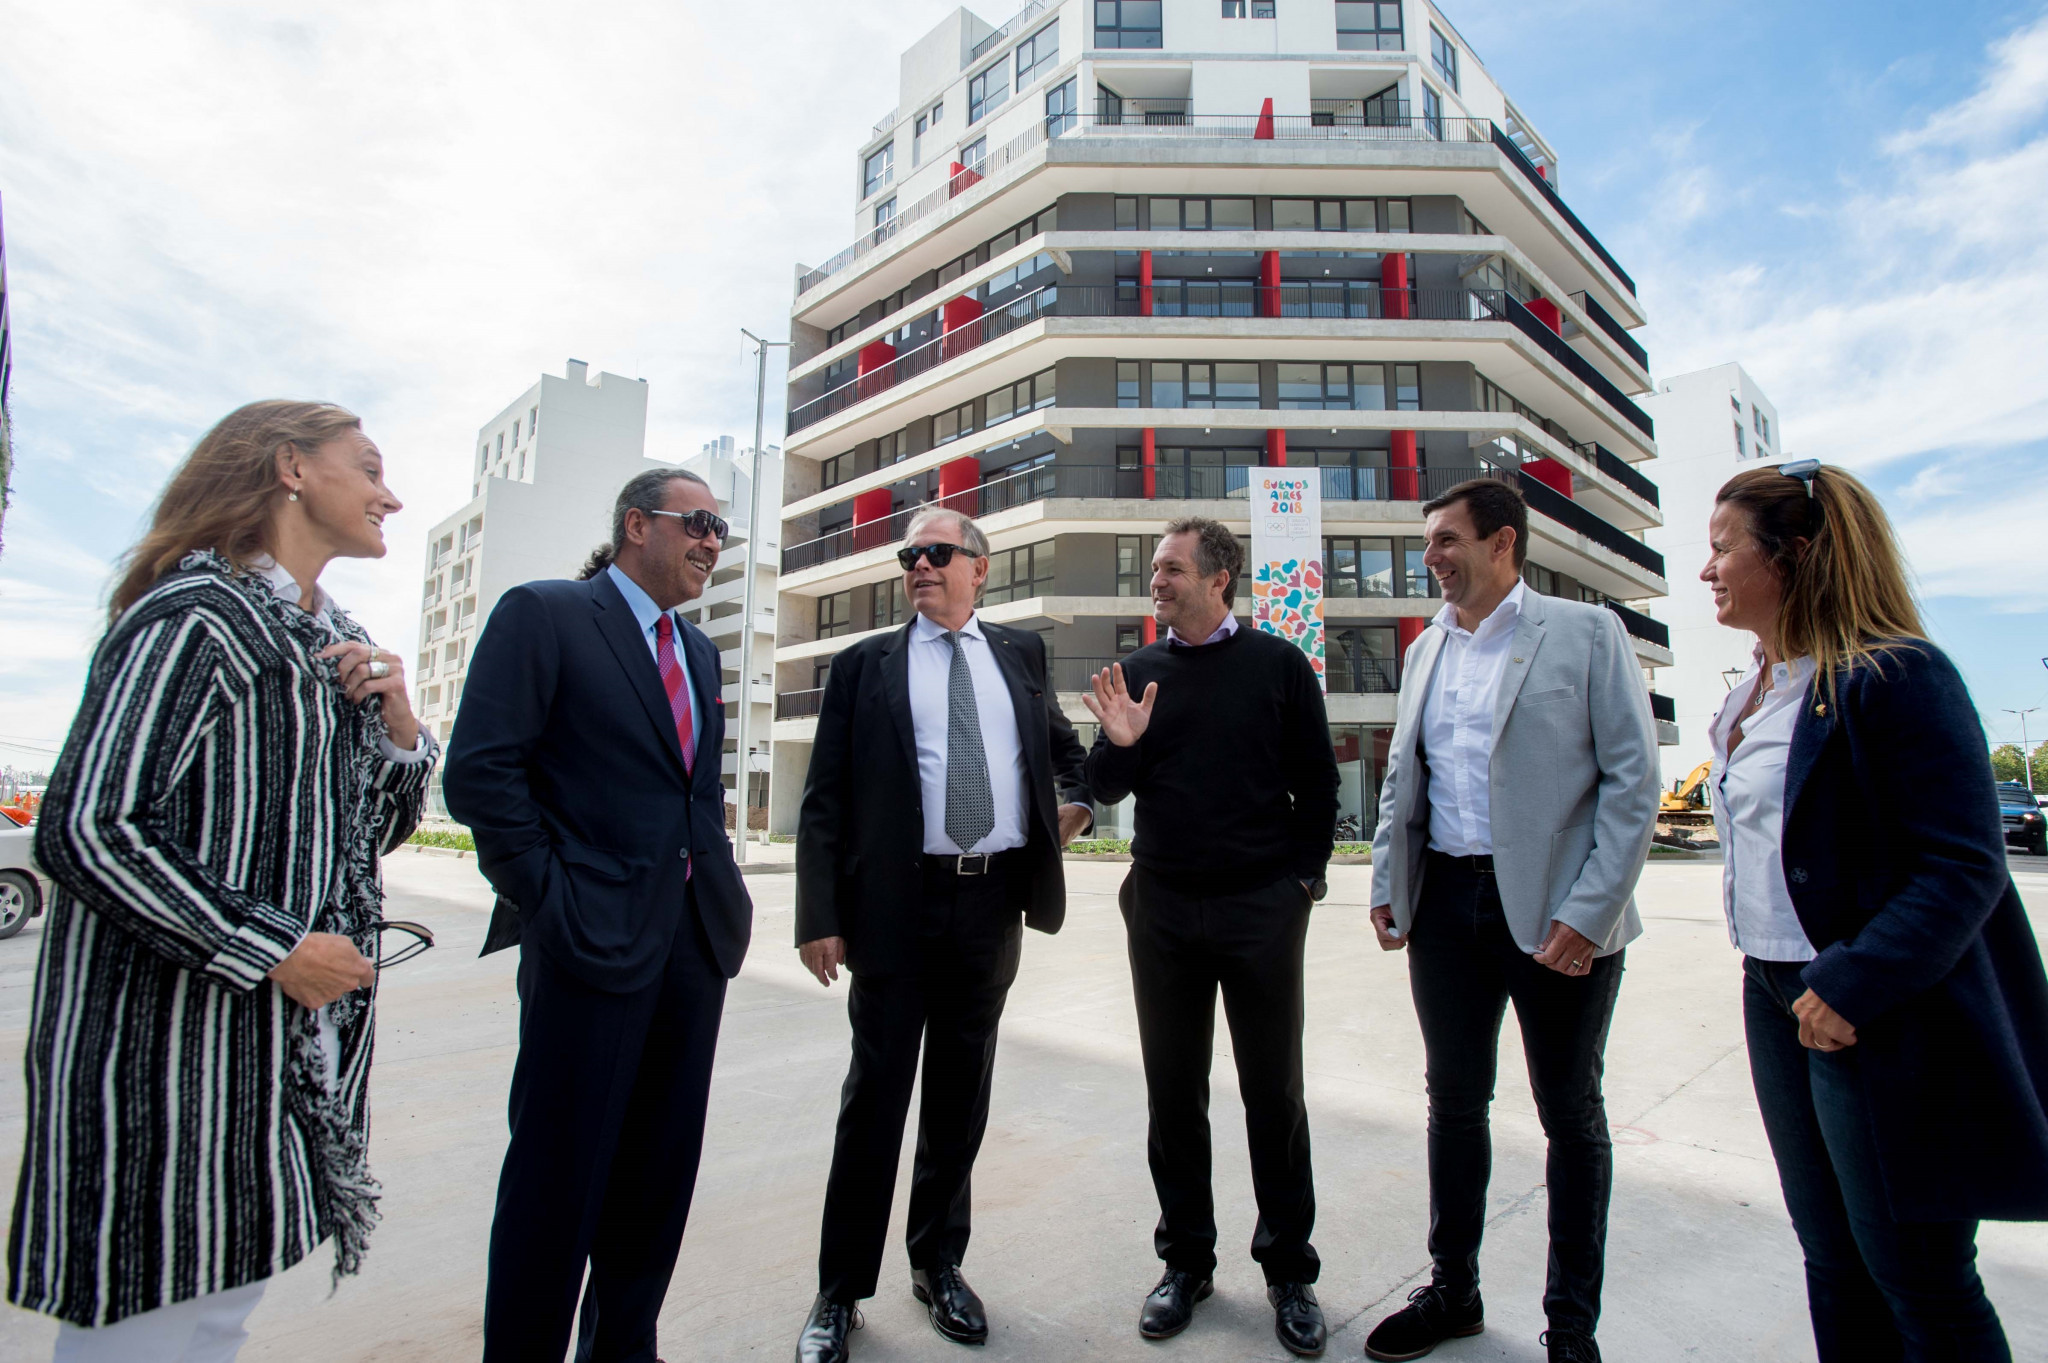 ANOC President Sheikh Ahmad visited the Youth Olympic Village ©Buenos Aires 2018 